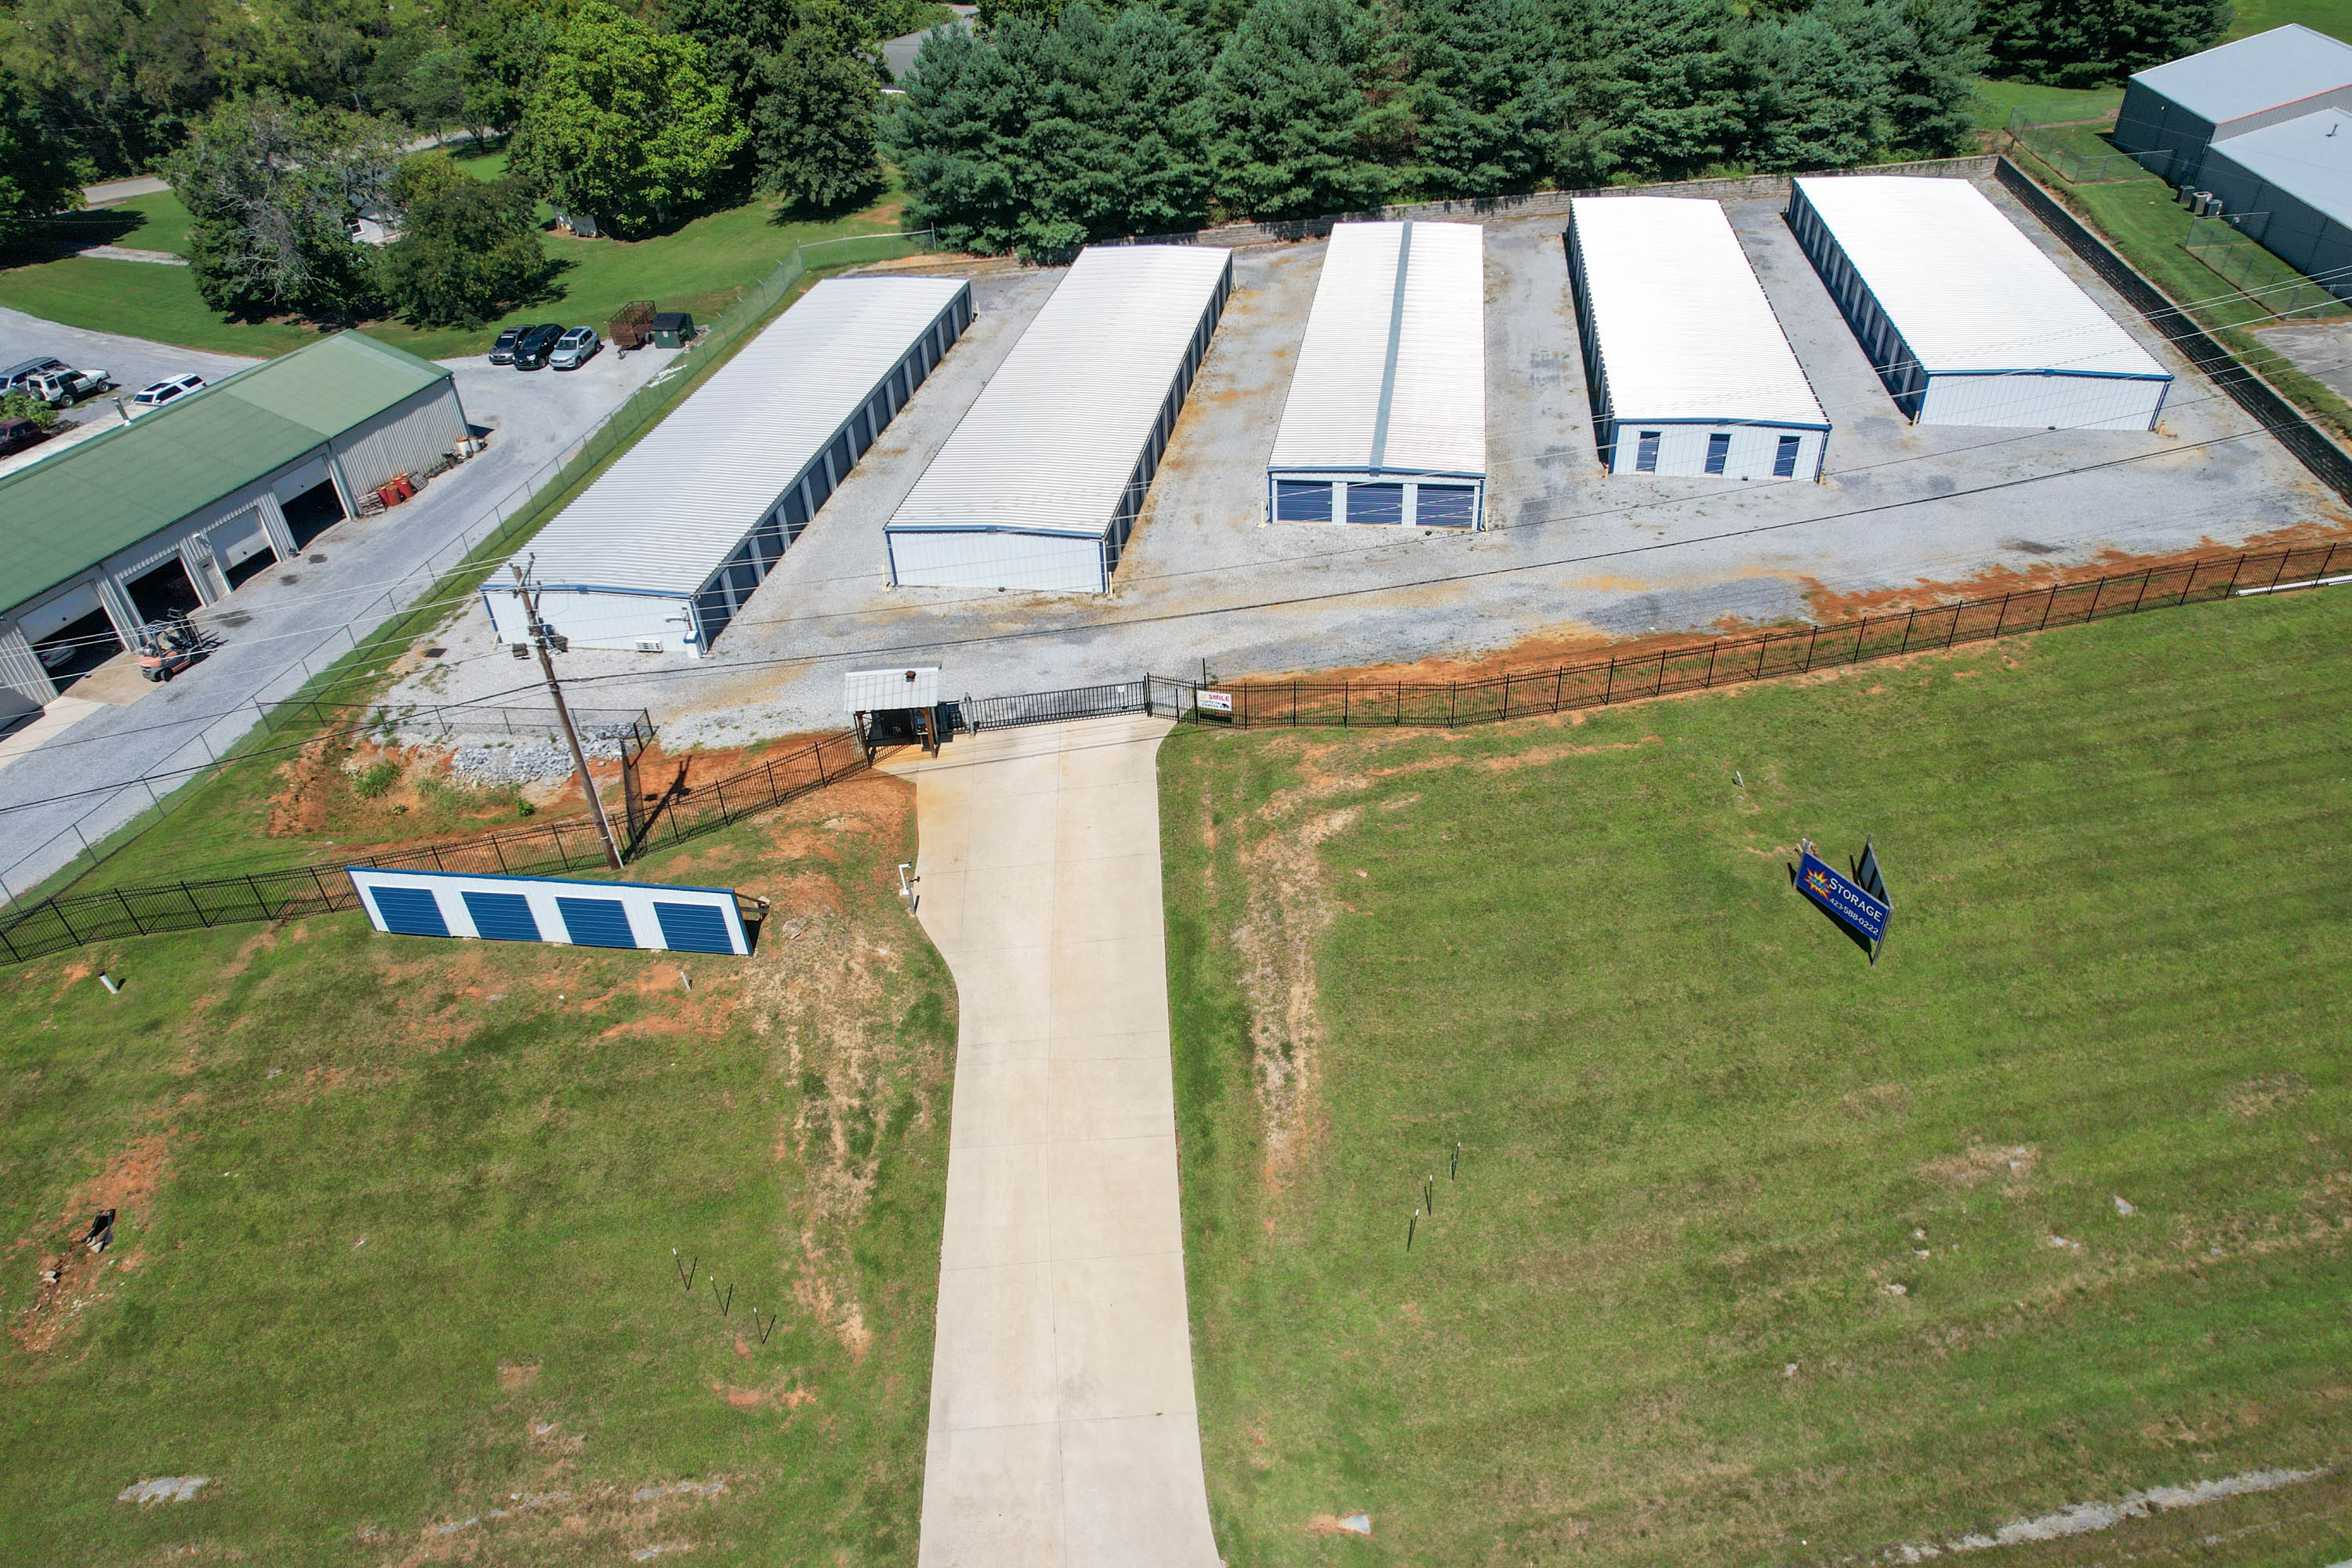 Self Storage from Above in Afton, TN